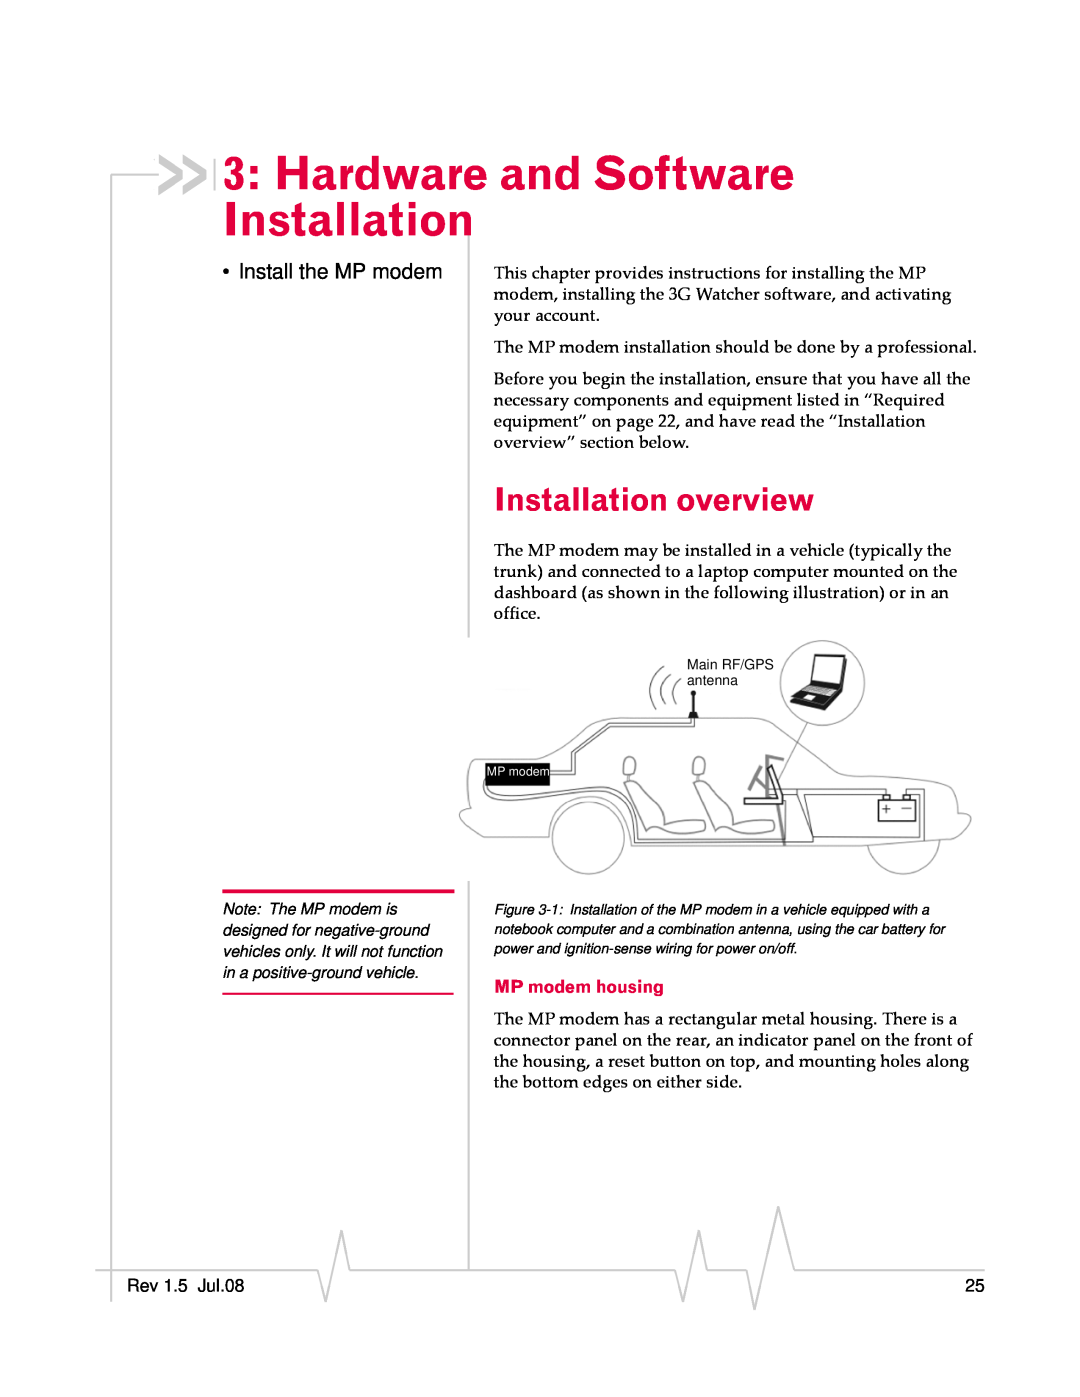 Sierra Wireless MP 880W manual Hardware and Software Installation, Installation overview, MP modem housing 